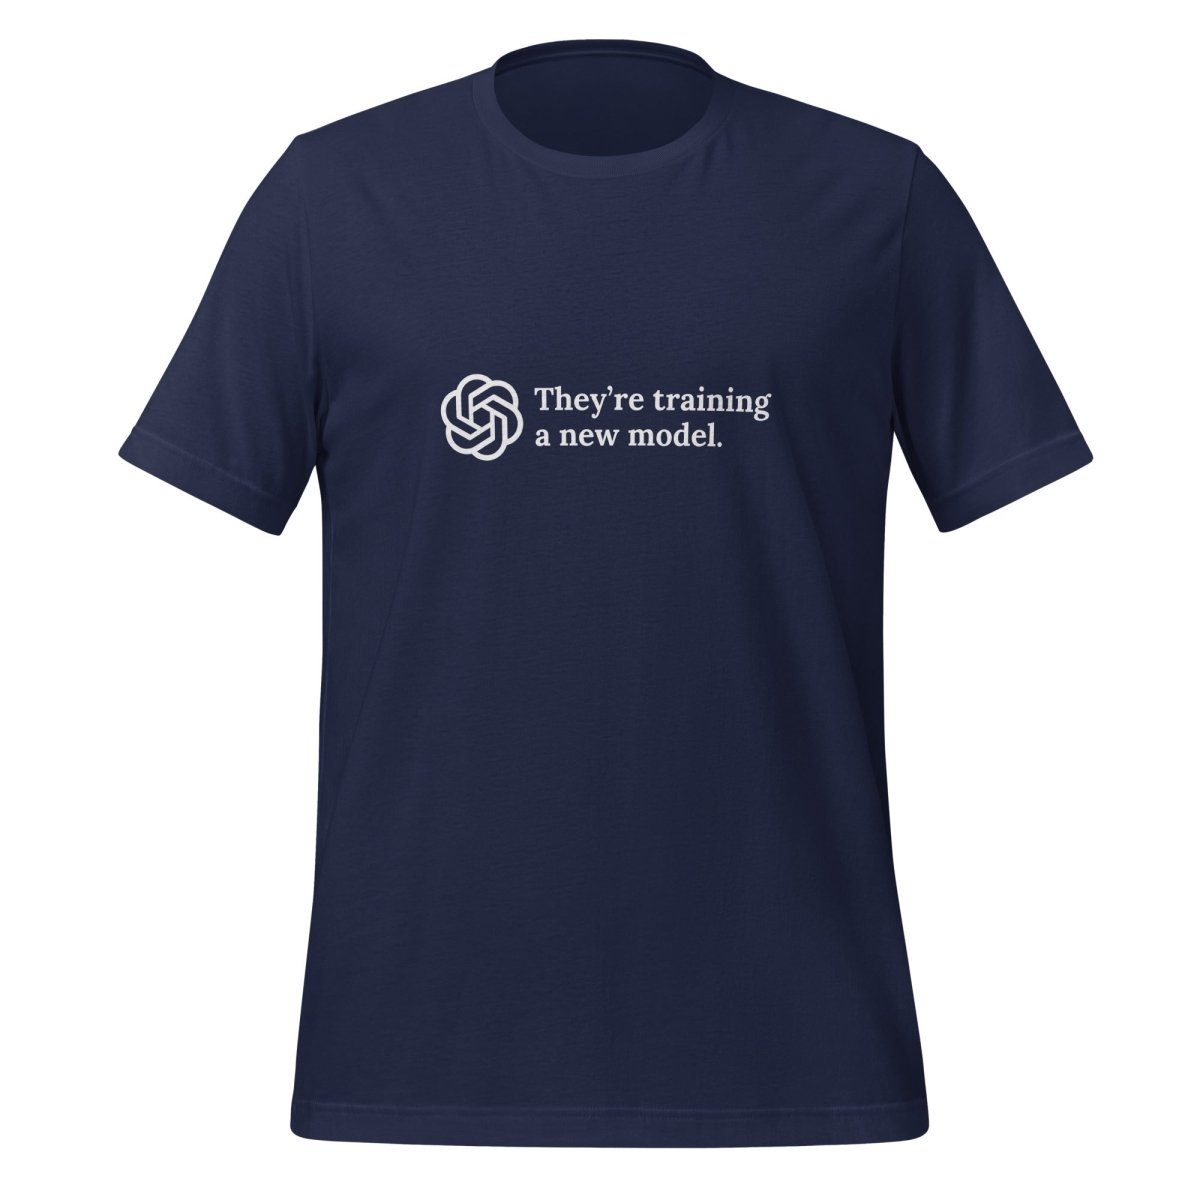 They're training a new model. T - Shirt (unisex) - Navy - AI Store